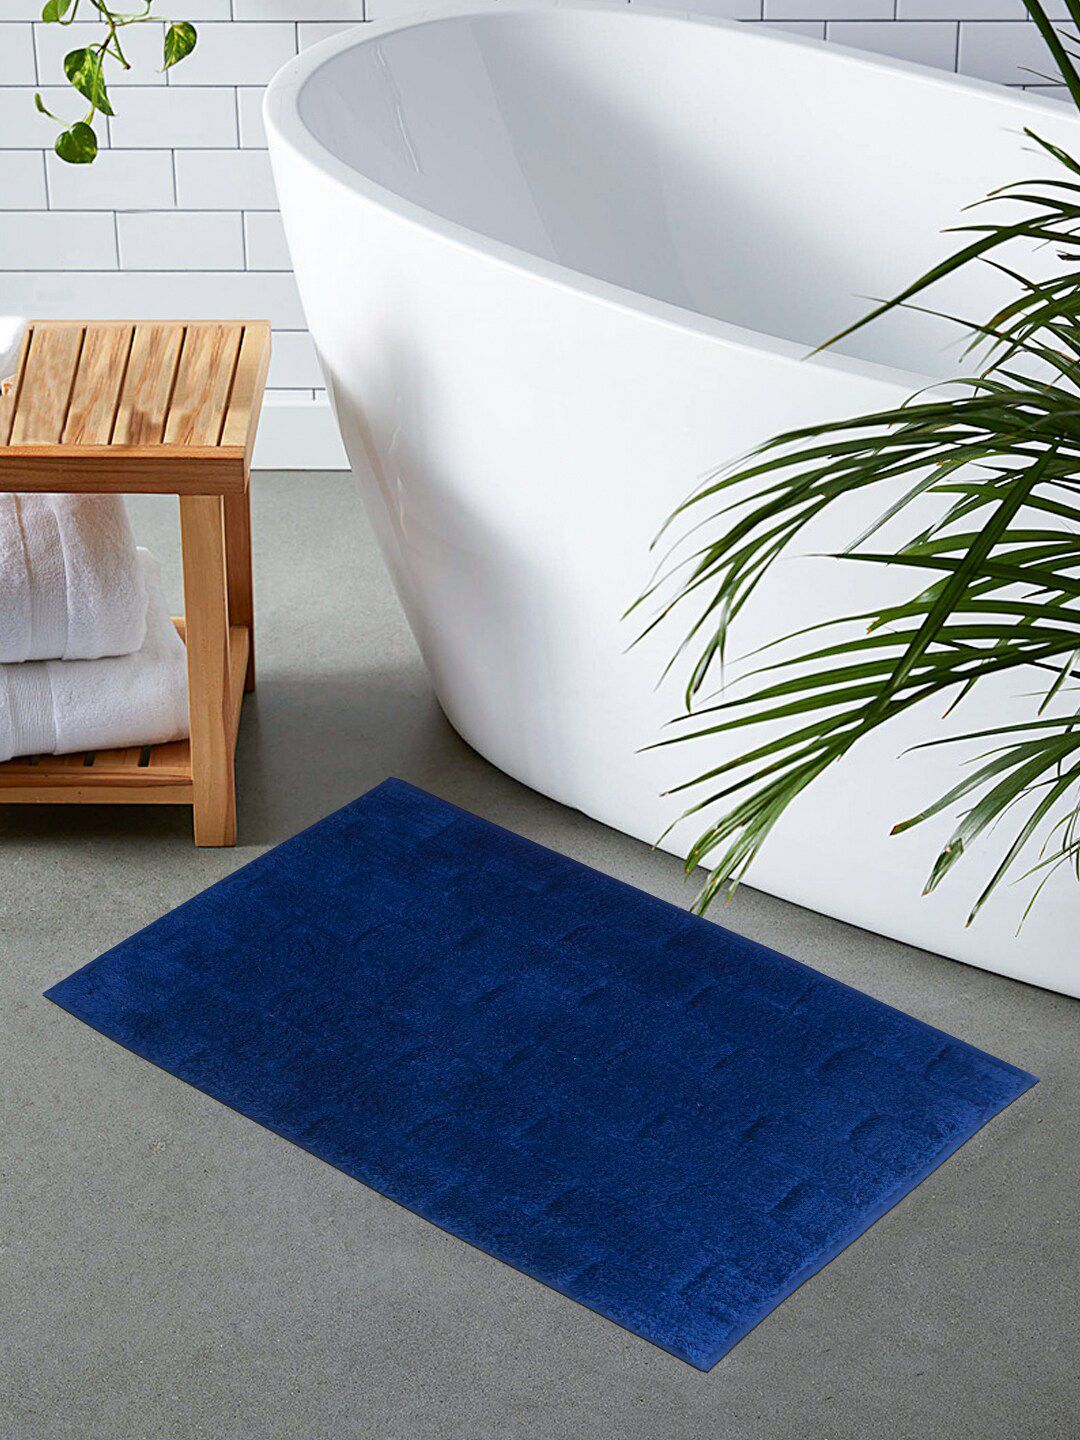 Shresmo Navy Blue Solid 2200 GSM Rectangular Bath Rugs Price in India